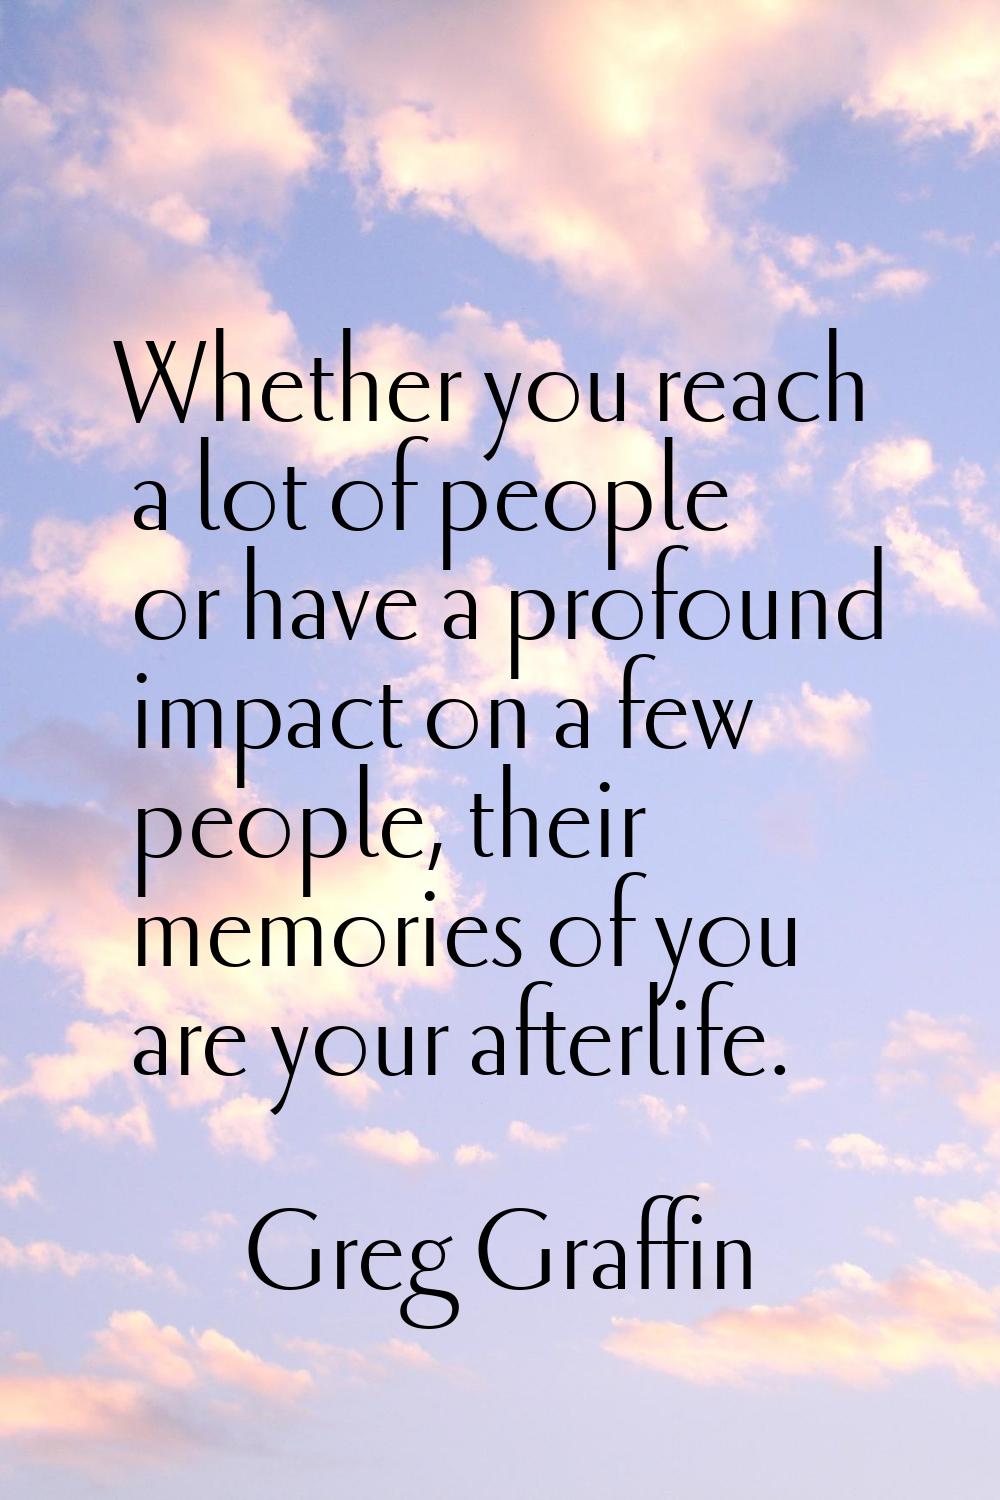 Whether you reach a lot of people or have a profound impact on a few people, their memories of you 